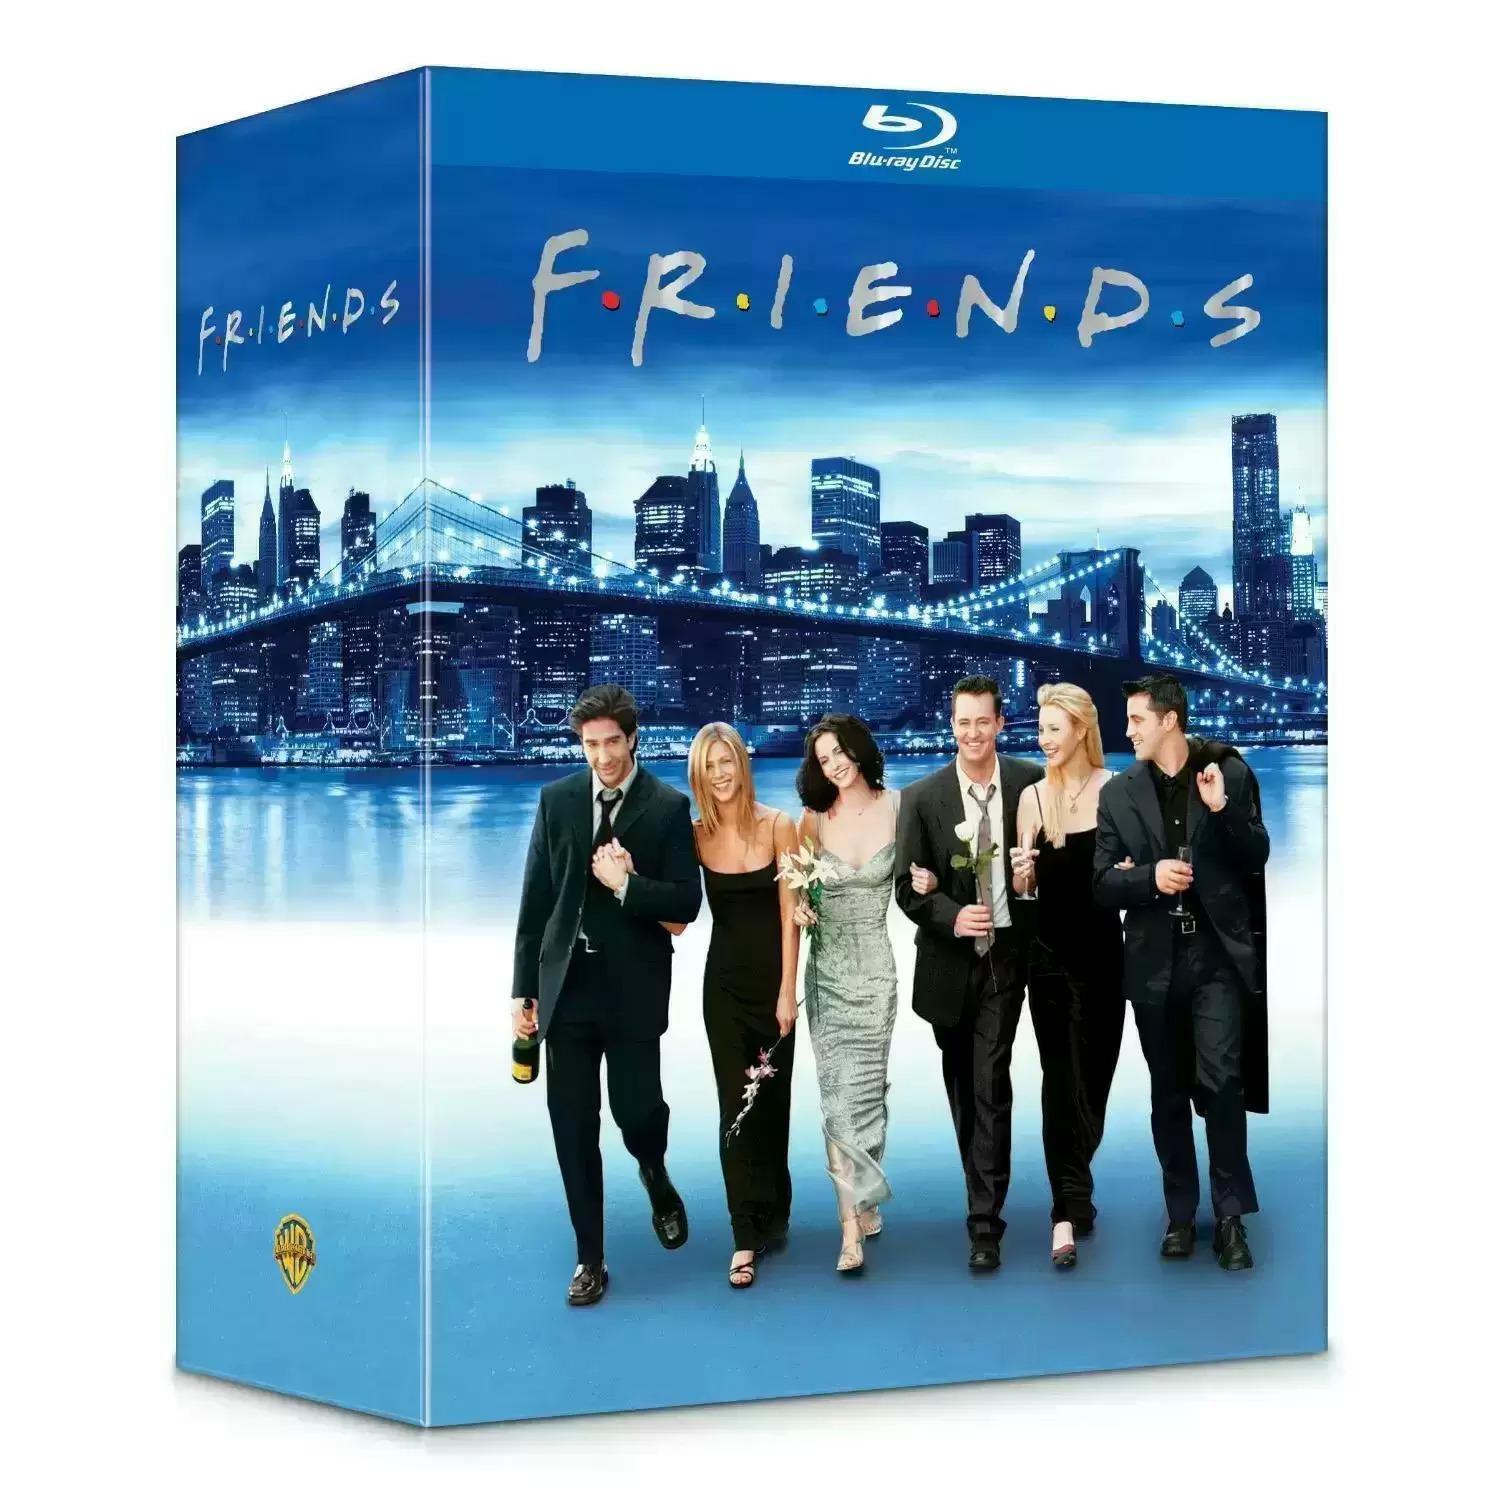 Friends The Complete Series Seasons 1-10 Blu-ray for $33.99 Shipped